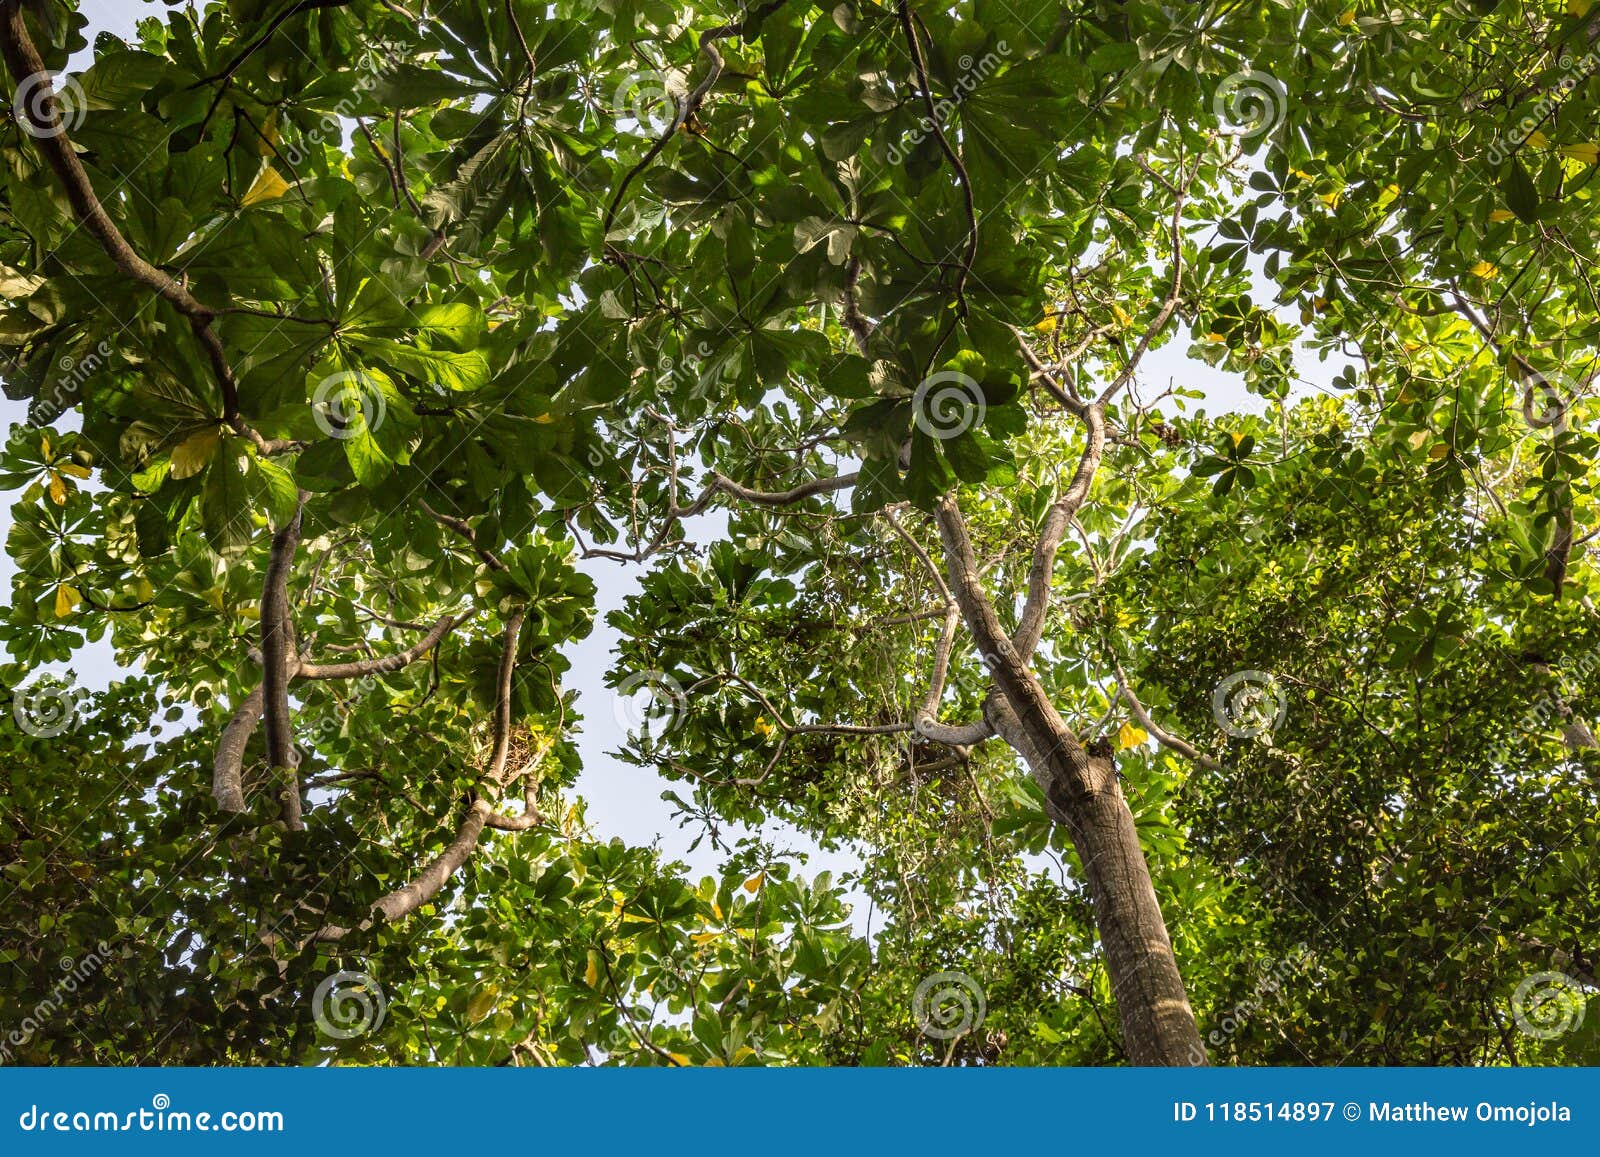 canopy of mangrove trees in mangrove forest as seen in lekki conservation center in lekki, lagos nigeria.